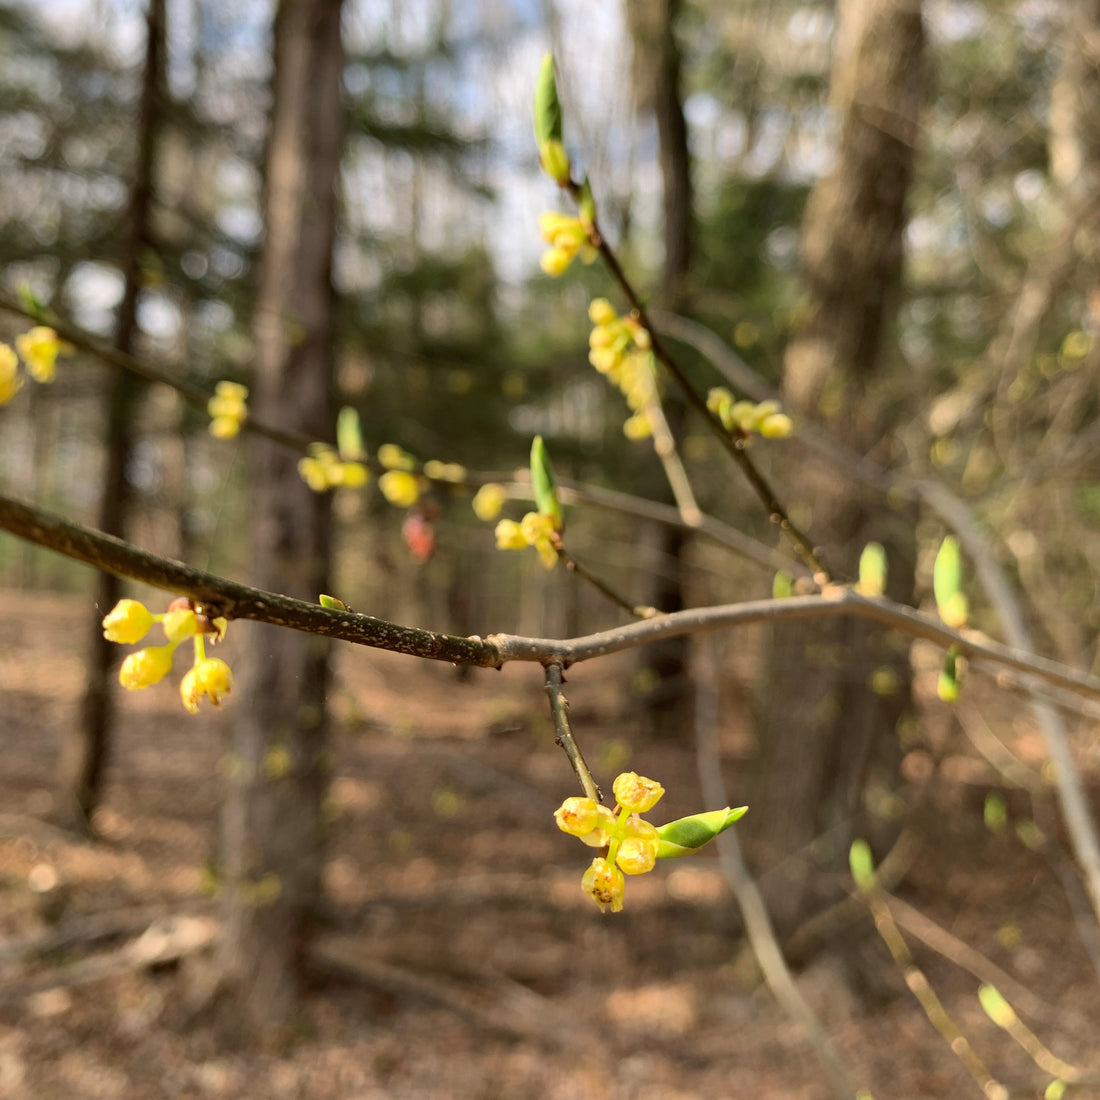 A close look at the yellow flowers of spicebush, lindera benzoin.